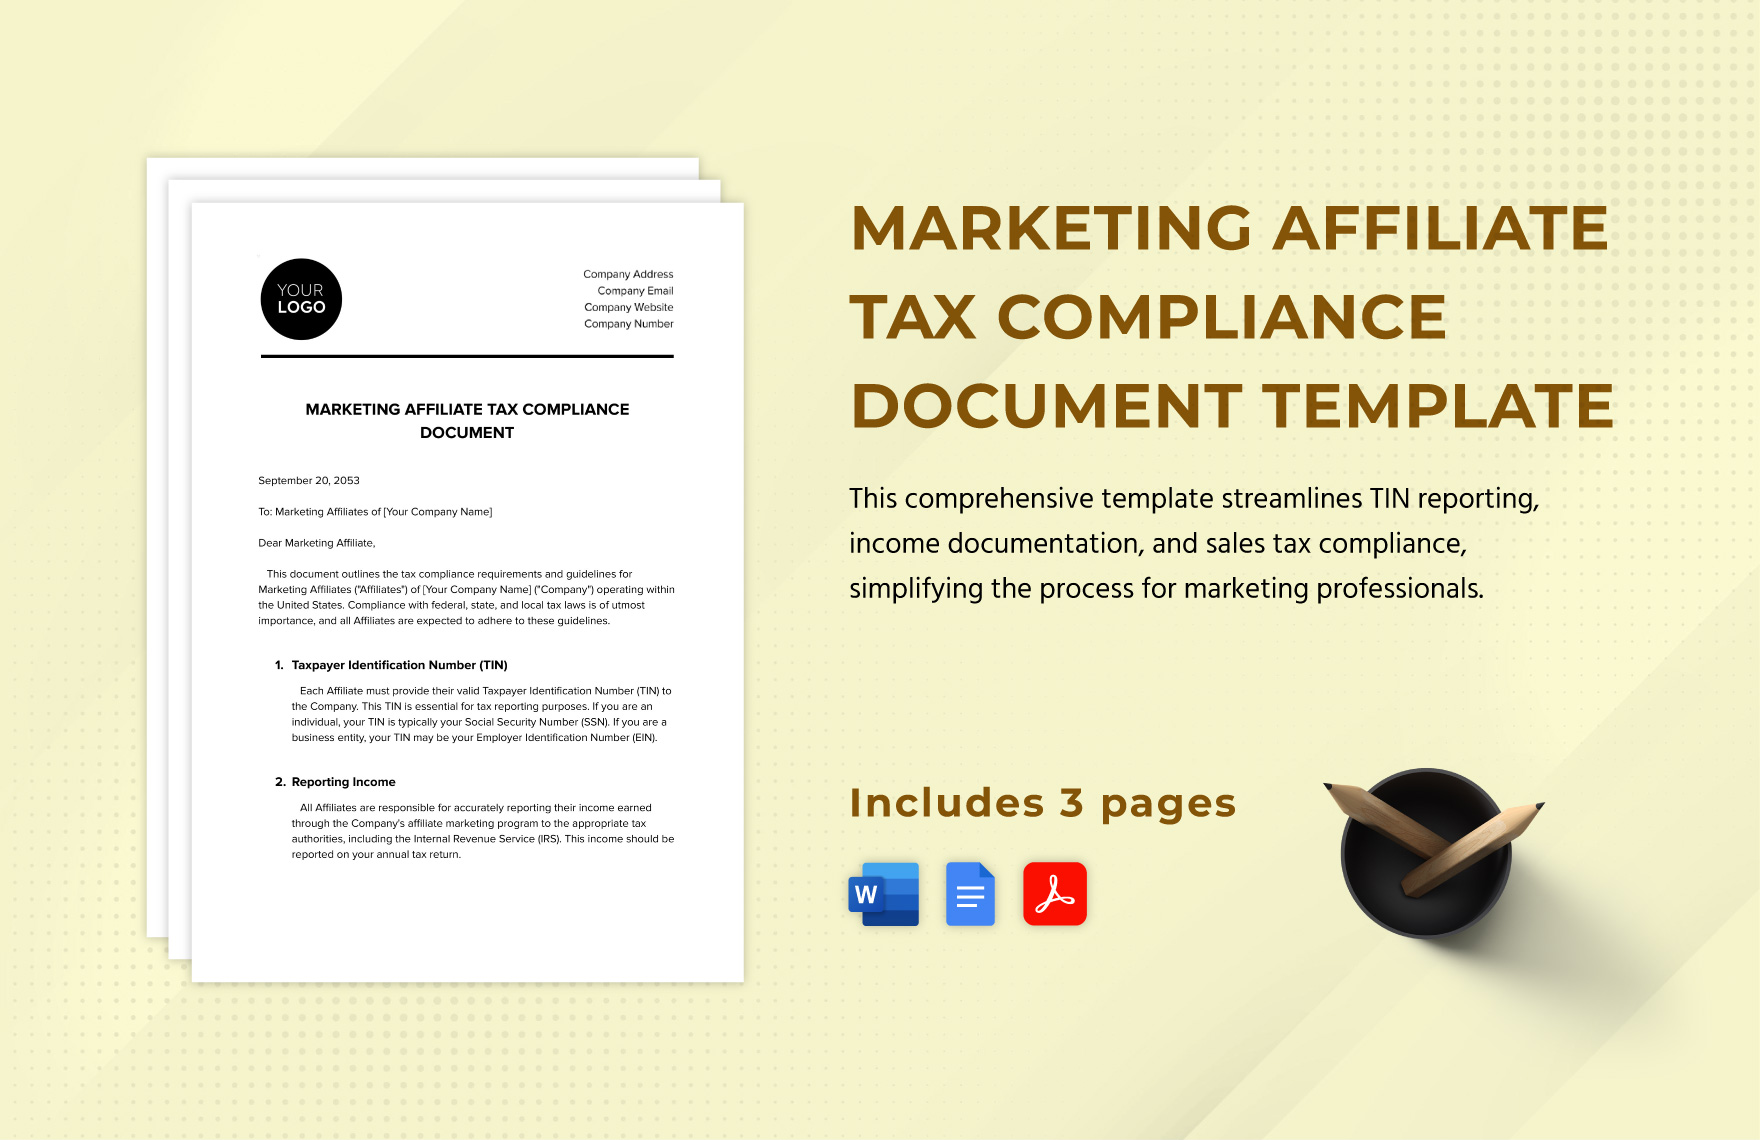 Marketing Affiliate Tax Compliance Document Template in Word, Google Docs, PDF